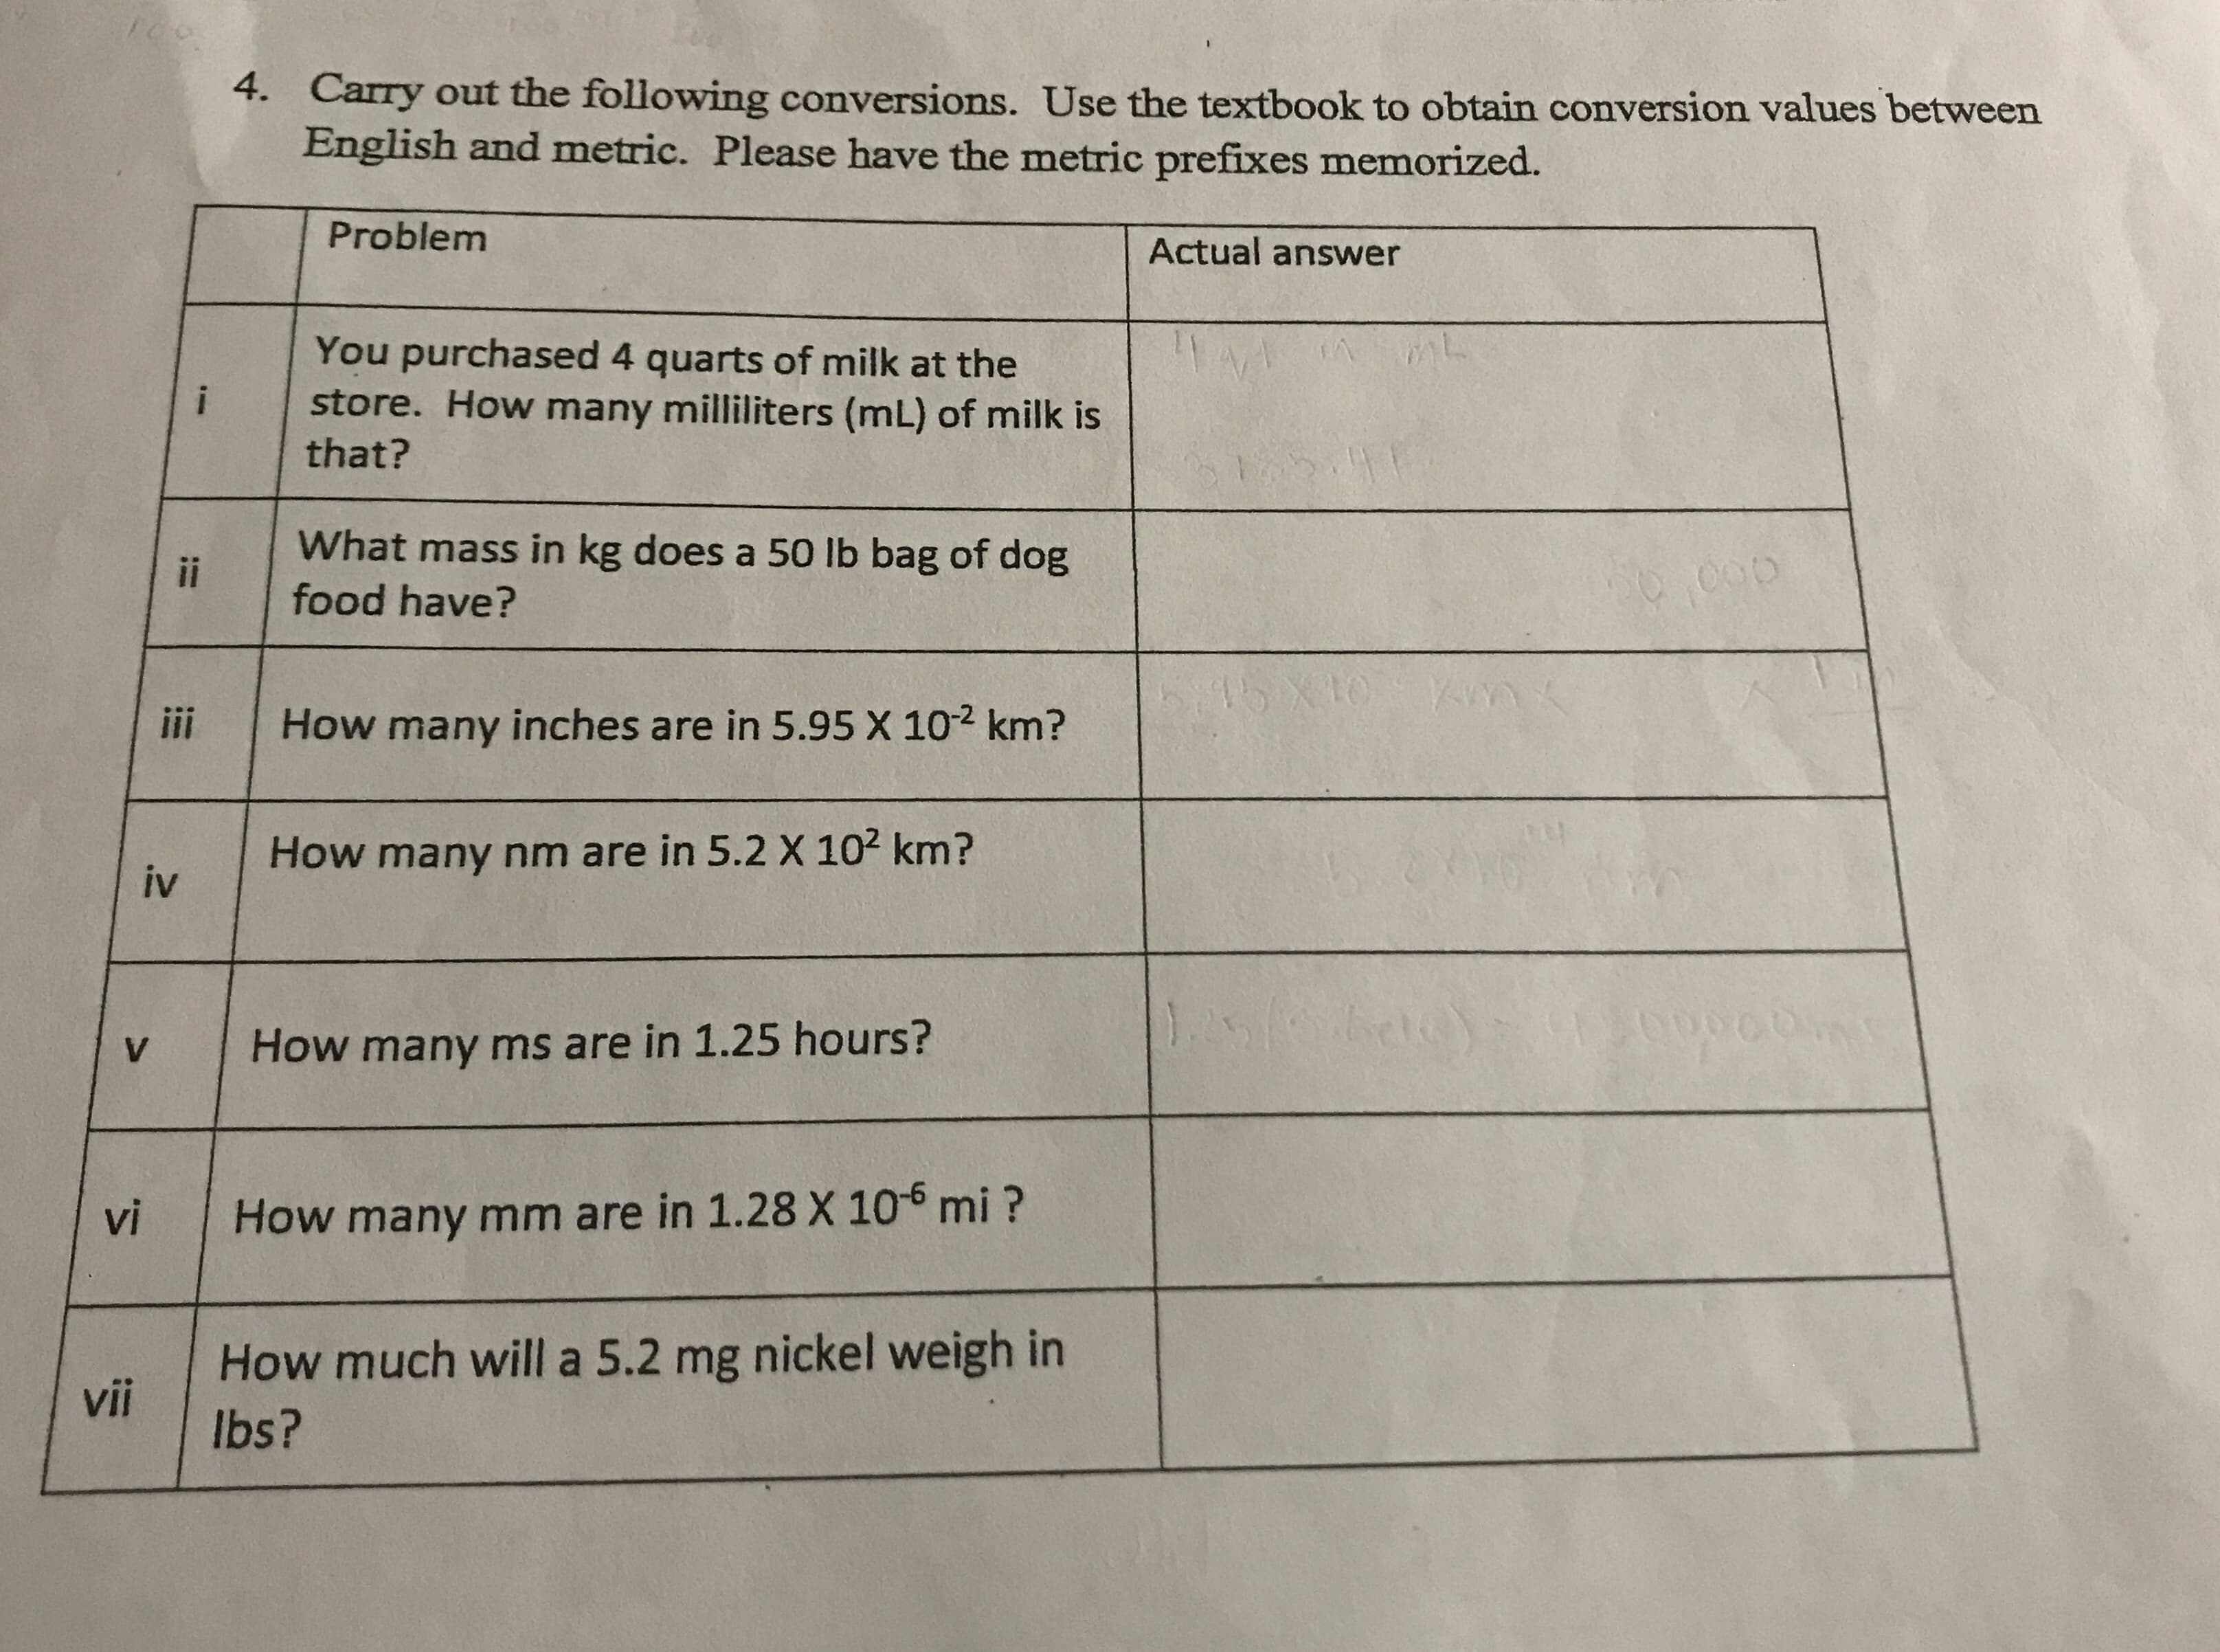 Fo
4. Carry out the following conversions. Use the textbook to obtain conversion values between
English and metric. Please have the metric prefixes memorized.
Problem
Actual answer
You purchased 4 quarts of milk at the
store. How many milliliters (mL) of milk is
that?
What mass in kg does a 50 lb bag of dog
food have?
ii
01X 9179
Yvnn
ii
How many inches are in 5.95 X 102 km?
How many nm are in 5.2 X 102 km?
iv
1. Tae
How many ms are in 1.25 hours?
V
vi
How many mm are in 1.28 X 105 mi?
How much will a 5.2 mg nickel weigh in
vii
lbs?
